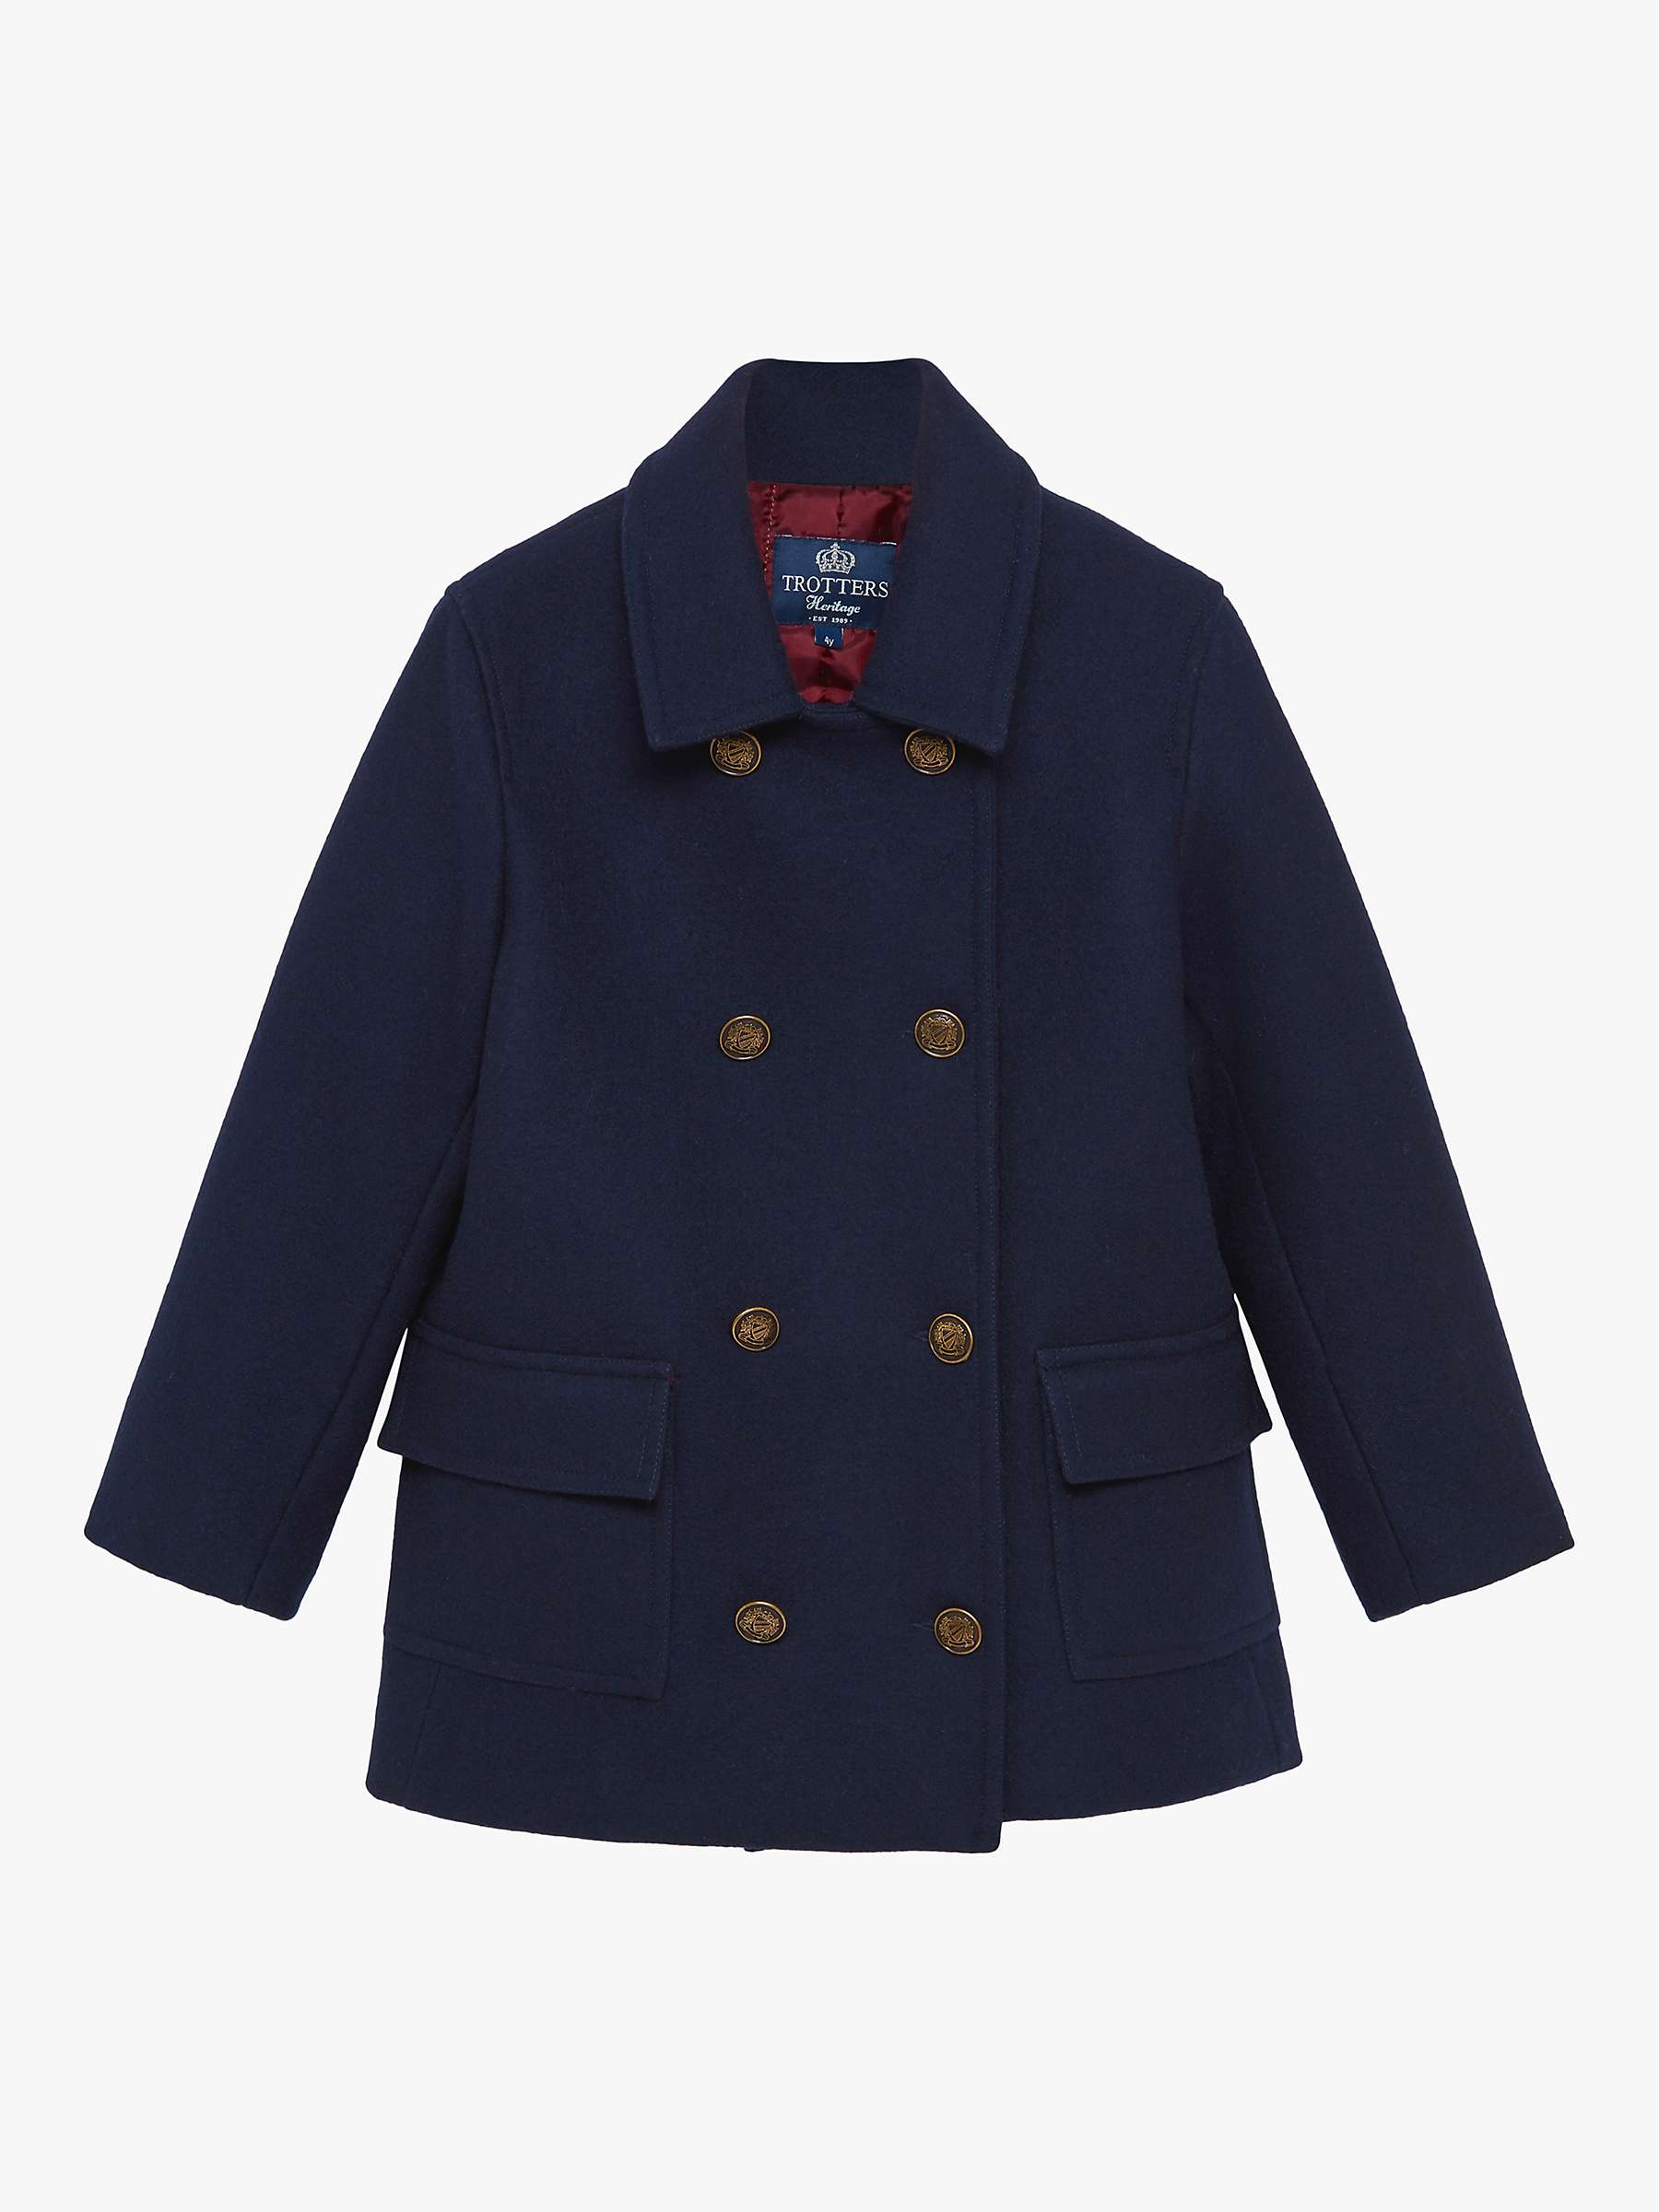 Buy Trotters Kids' Double Breasted Wool Coat, Navy Online at johnlewis.com